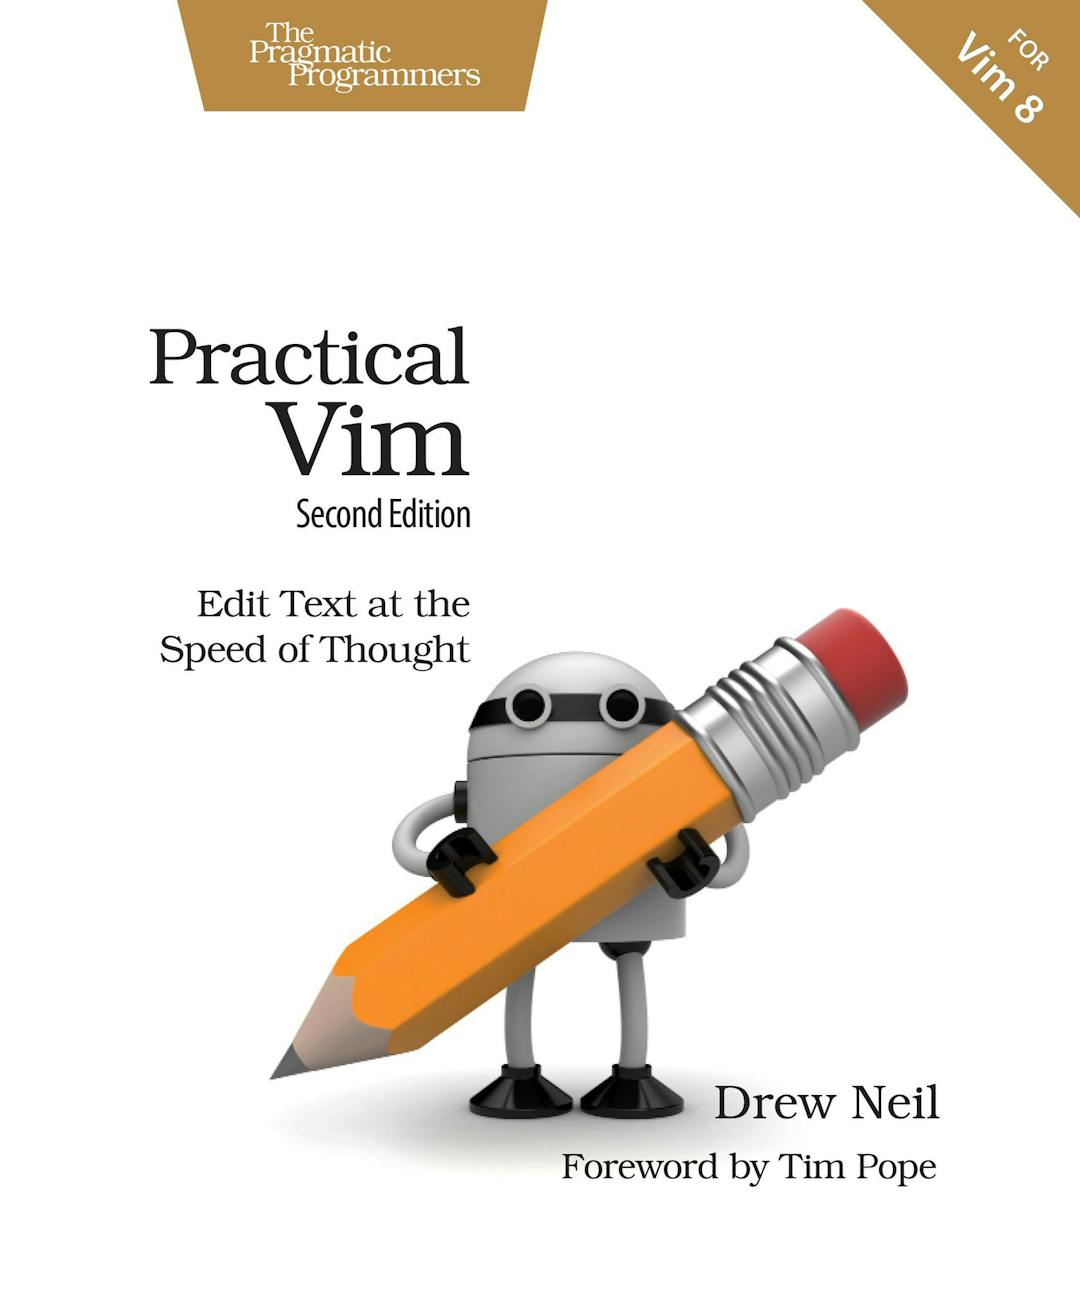 Practical Vim: Edit Text at the Speed of Thought, by Drew Neil